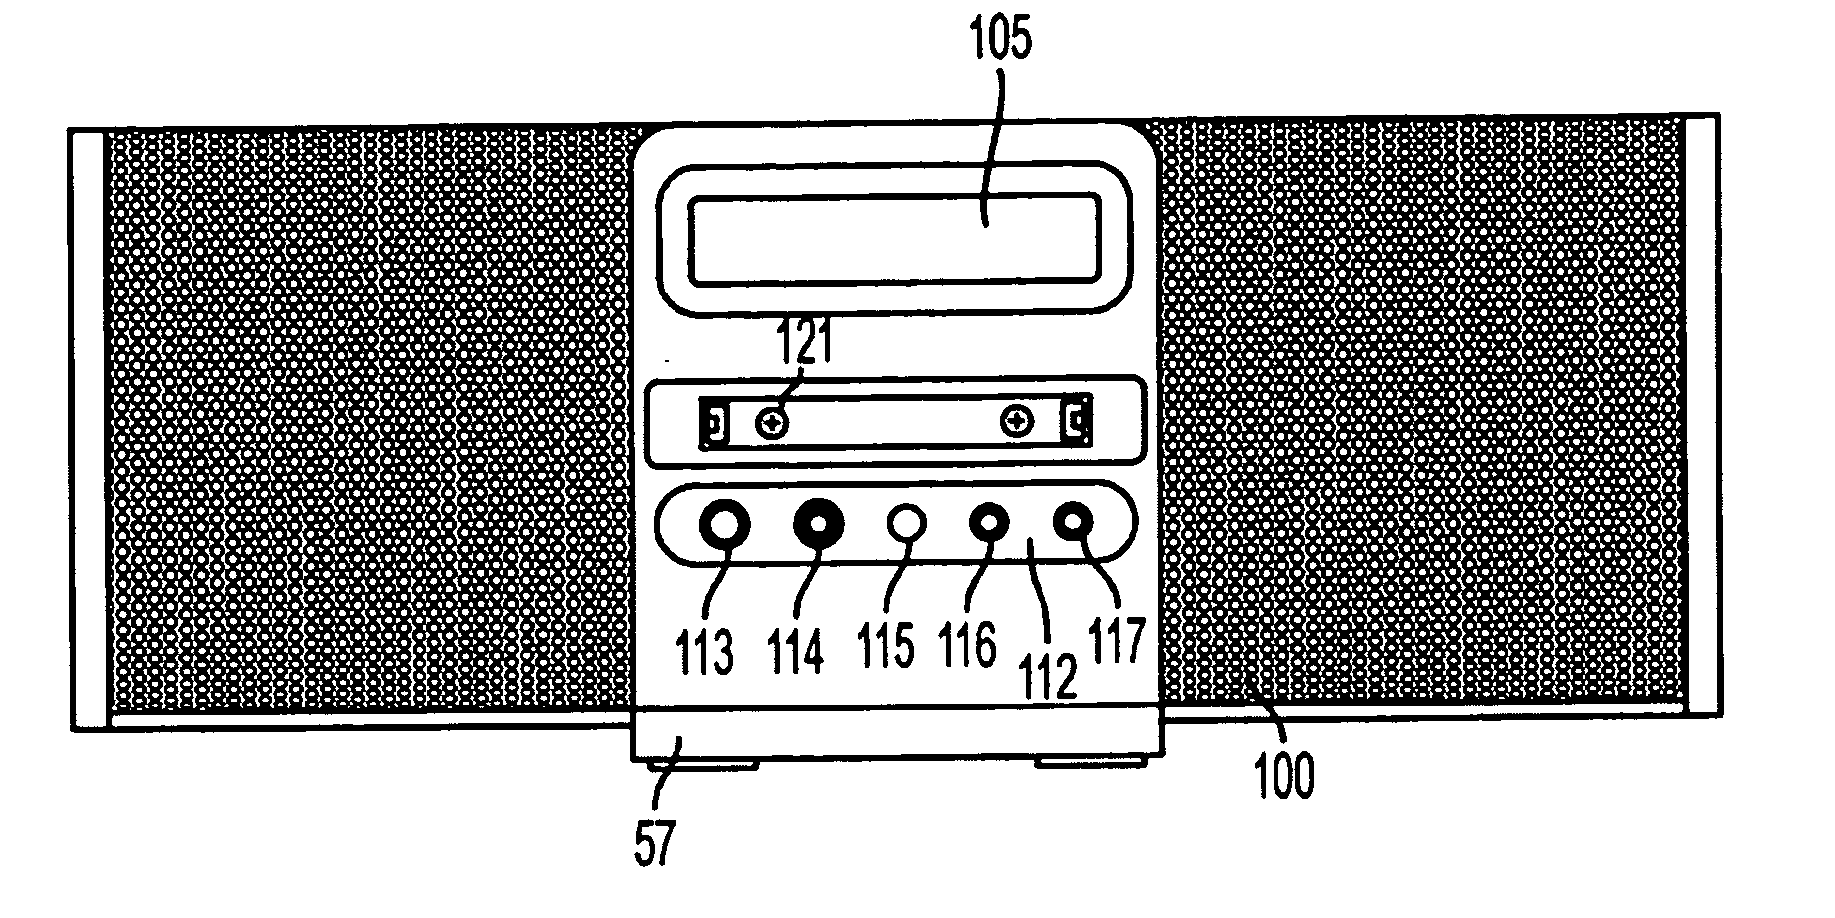 Portable media reproduction system